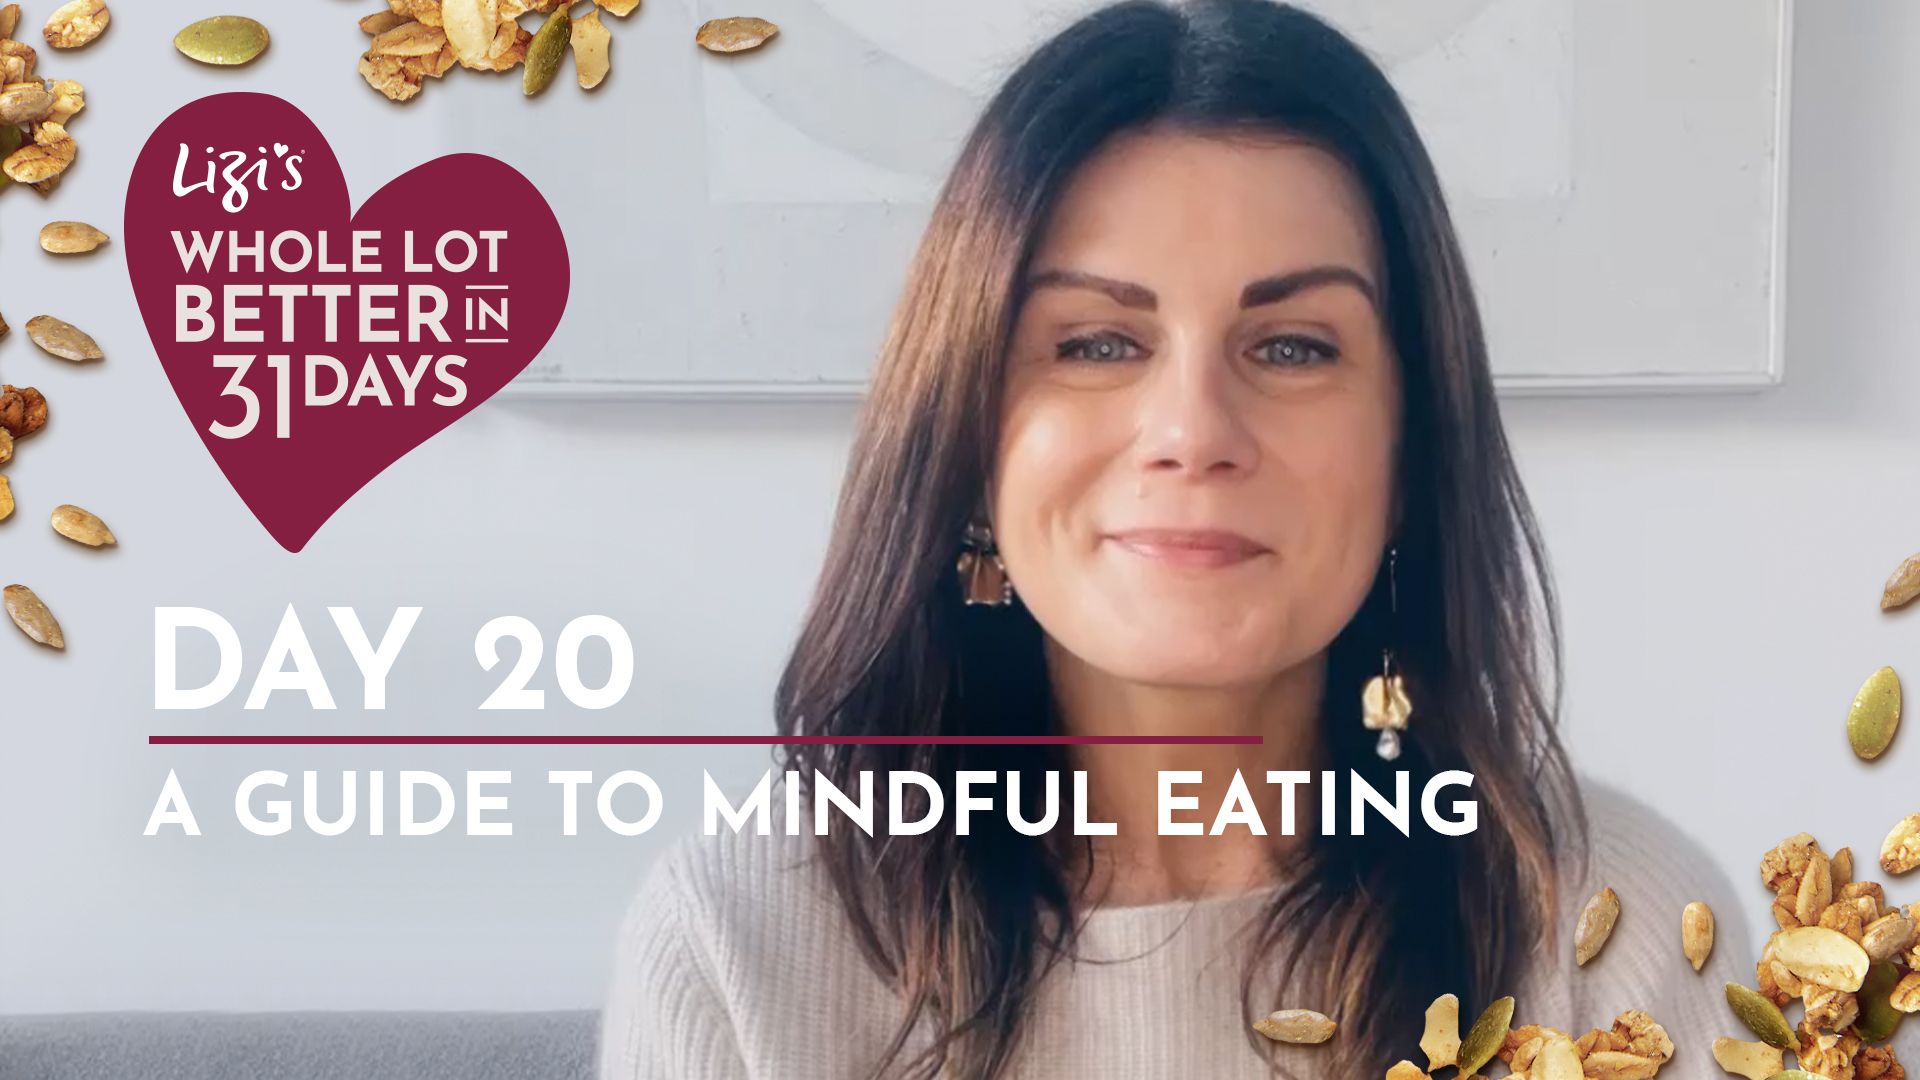 A GUIDE TO MINDFUL EATING  by Nutritional Therapist Eve Kalinik